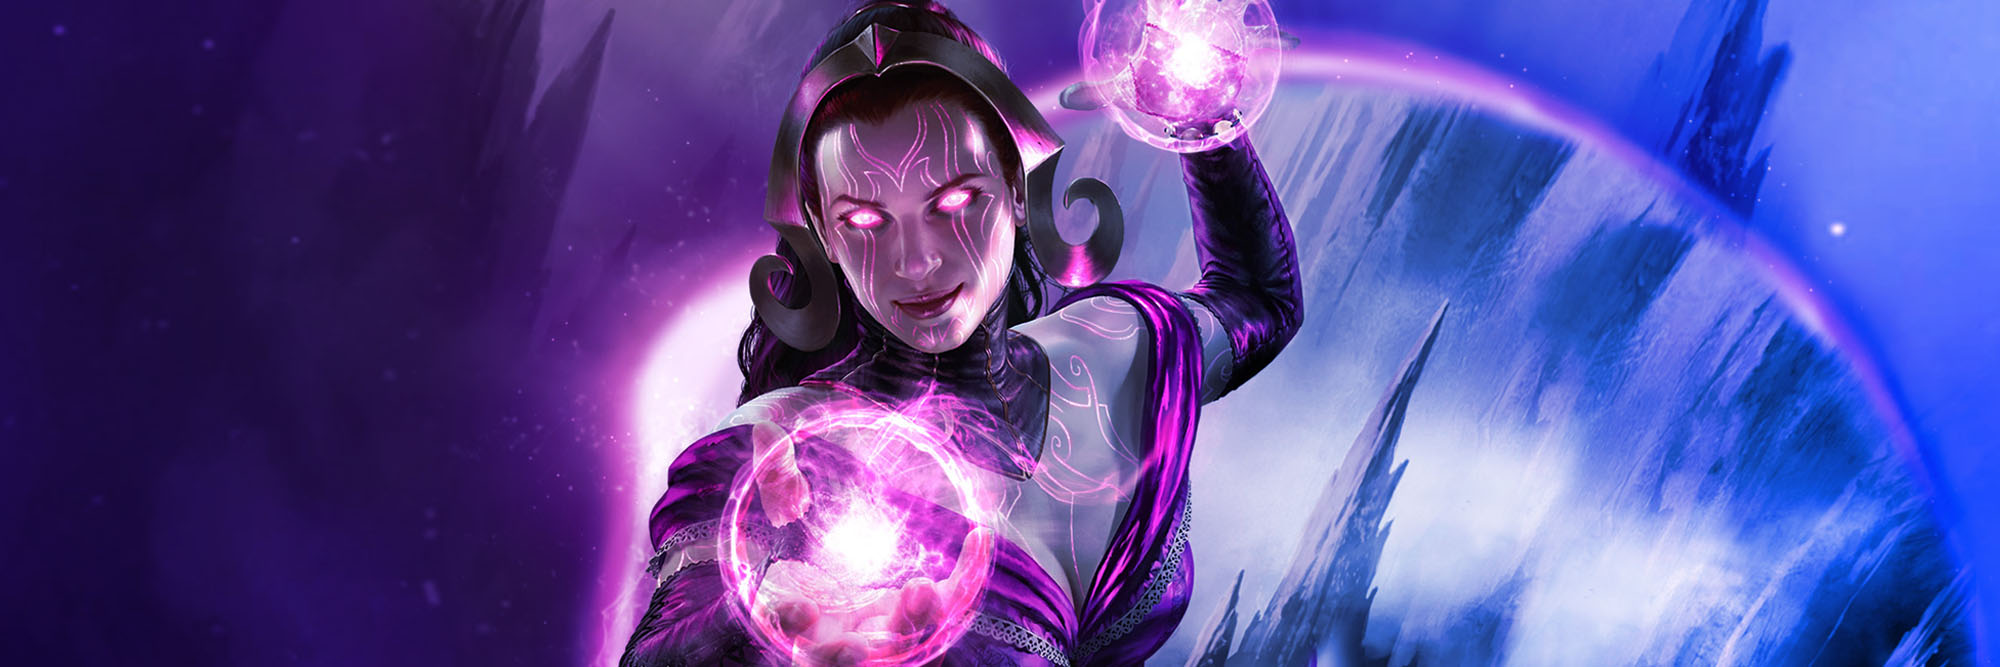 Magic: The Gathering's new digital card game Arena is gunning for Hearthsto  - Tabletop Gaming